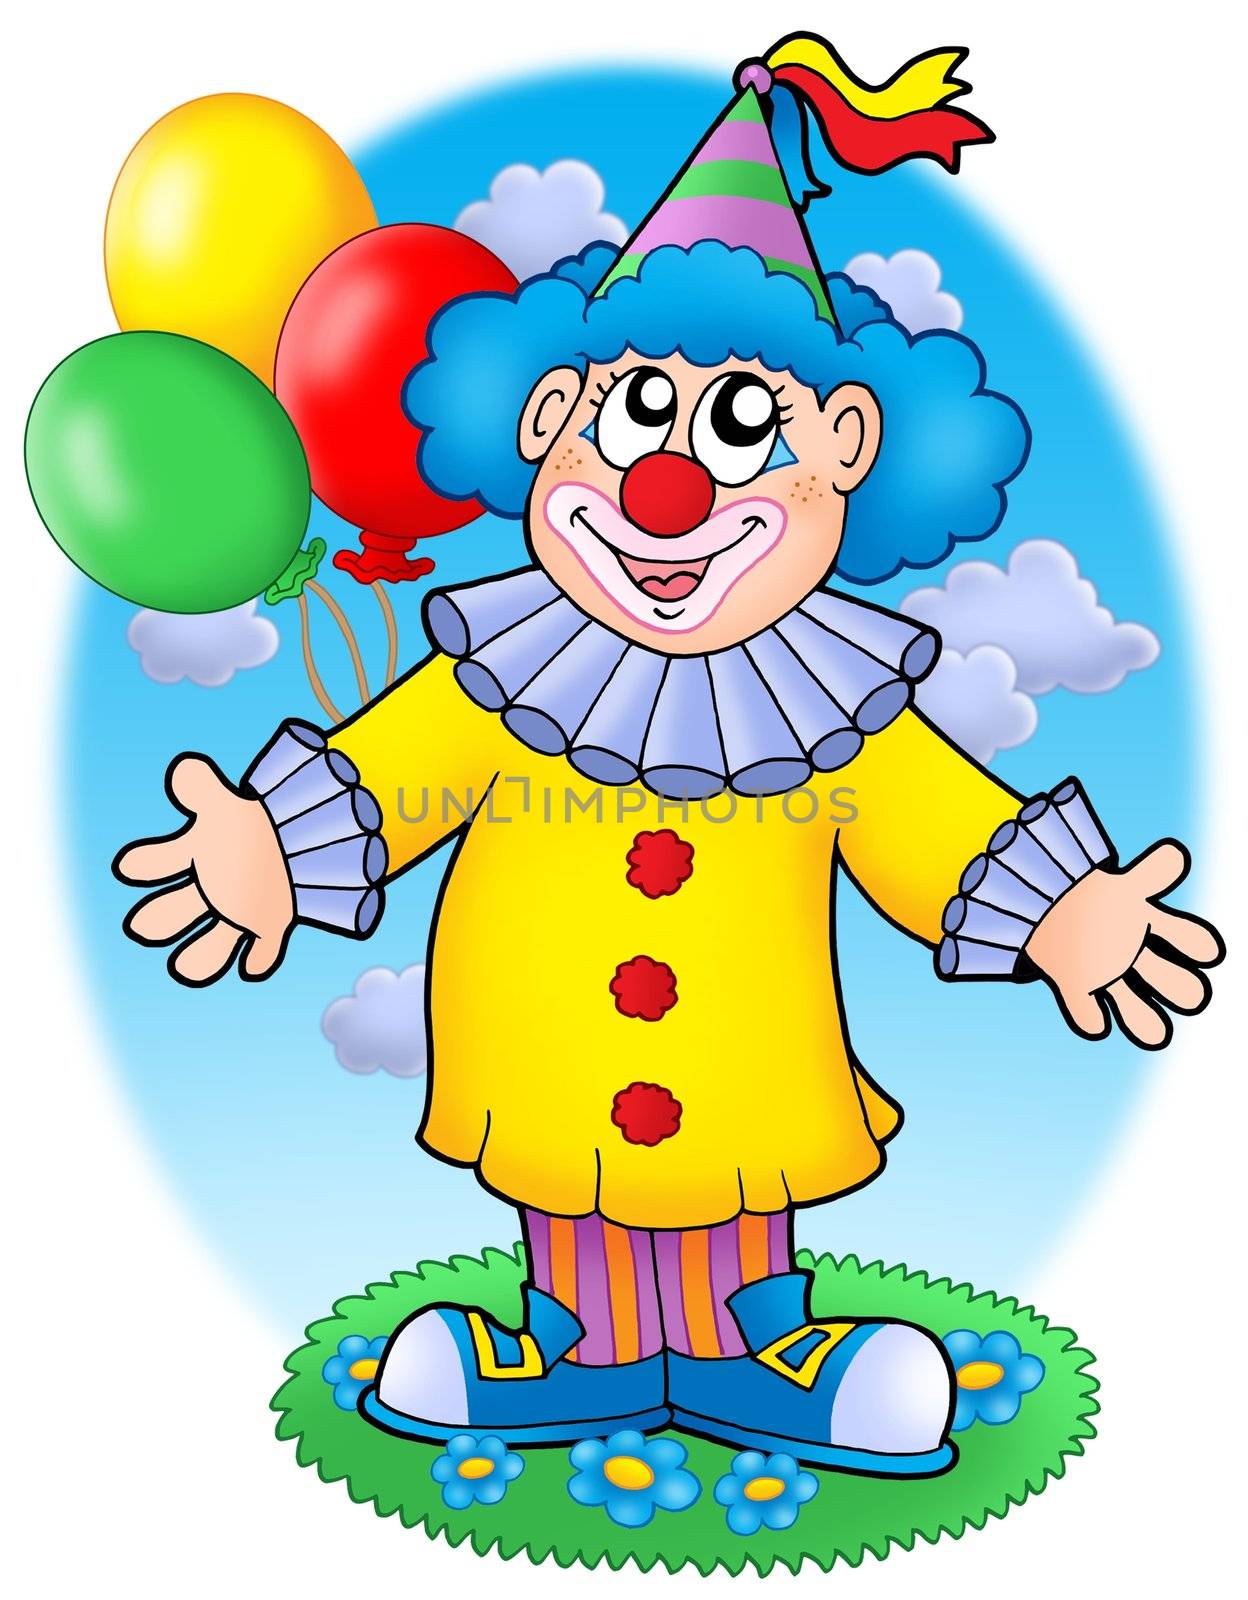 Smiling clown with balloons - color illustration.